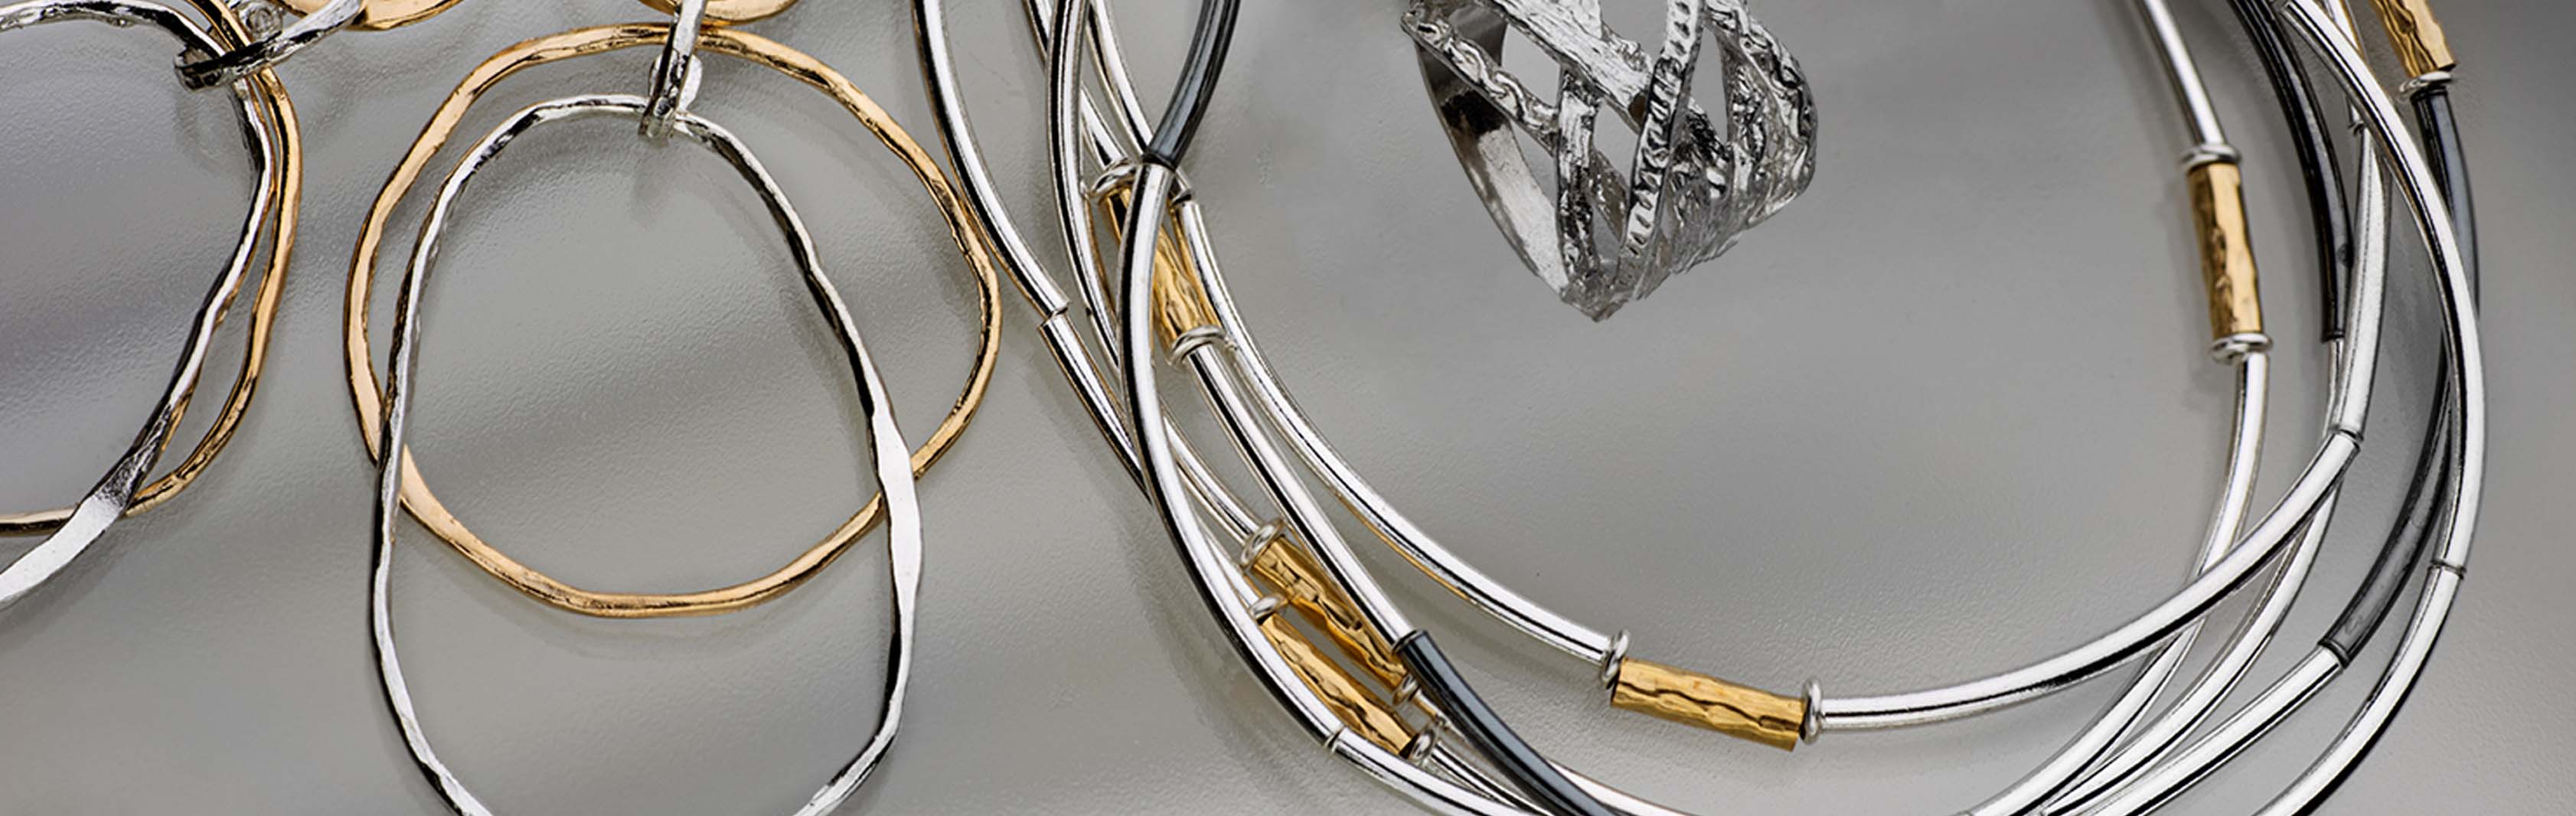 Tubes Collection | White, Oxidized & Gilded Silver Jewelry